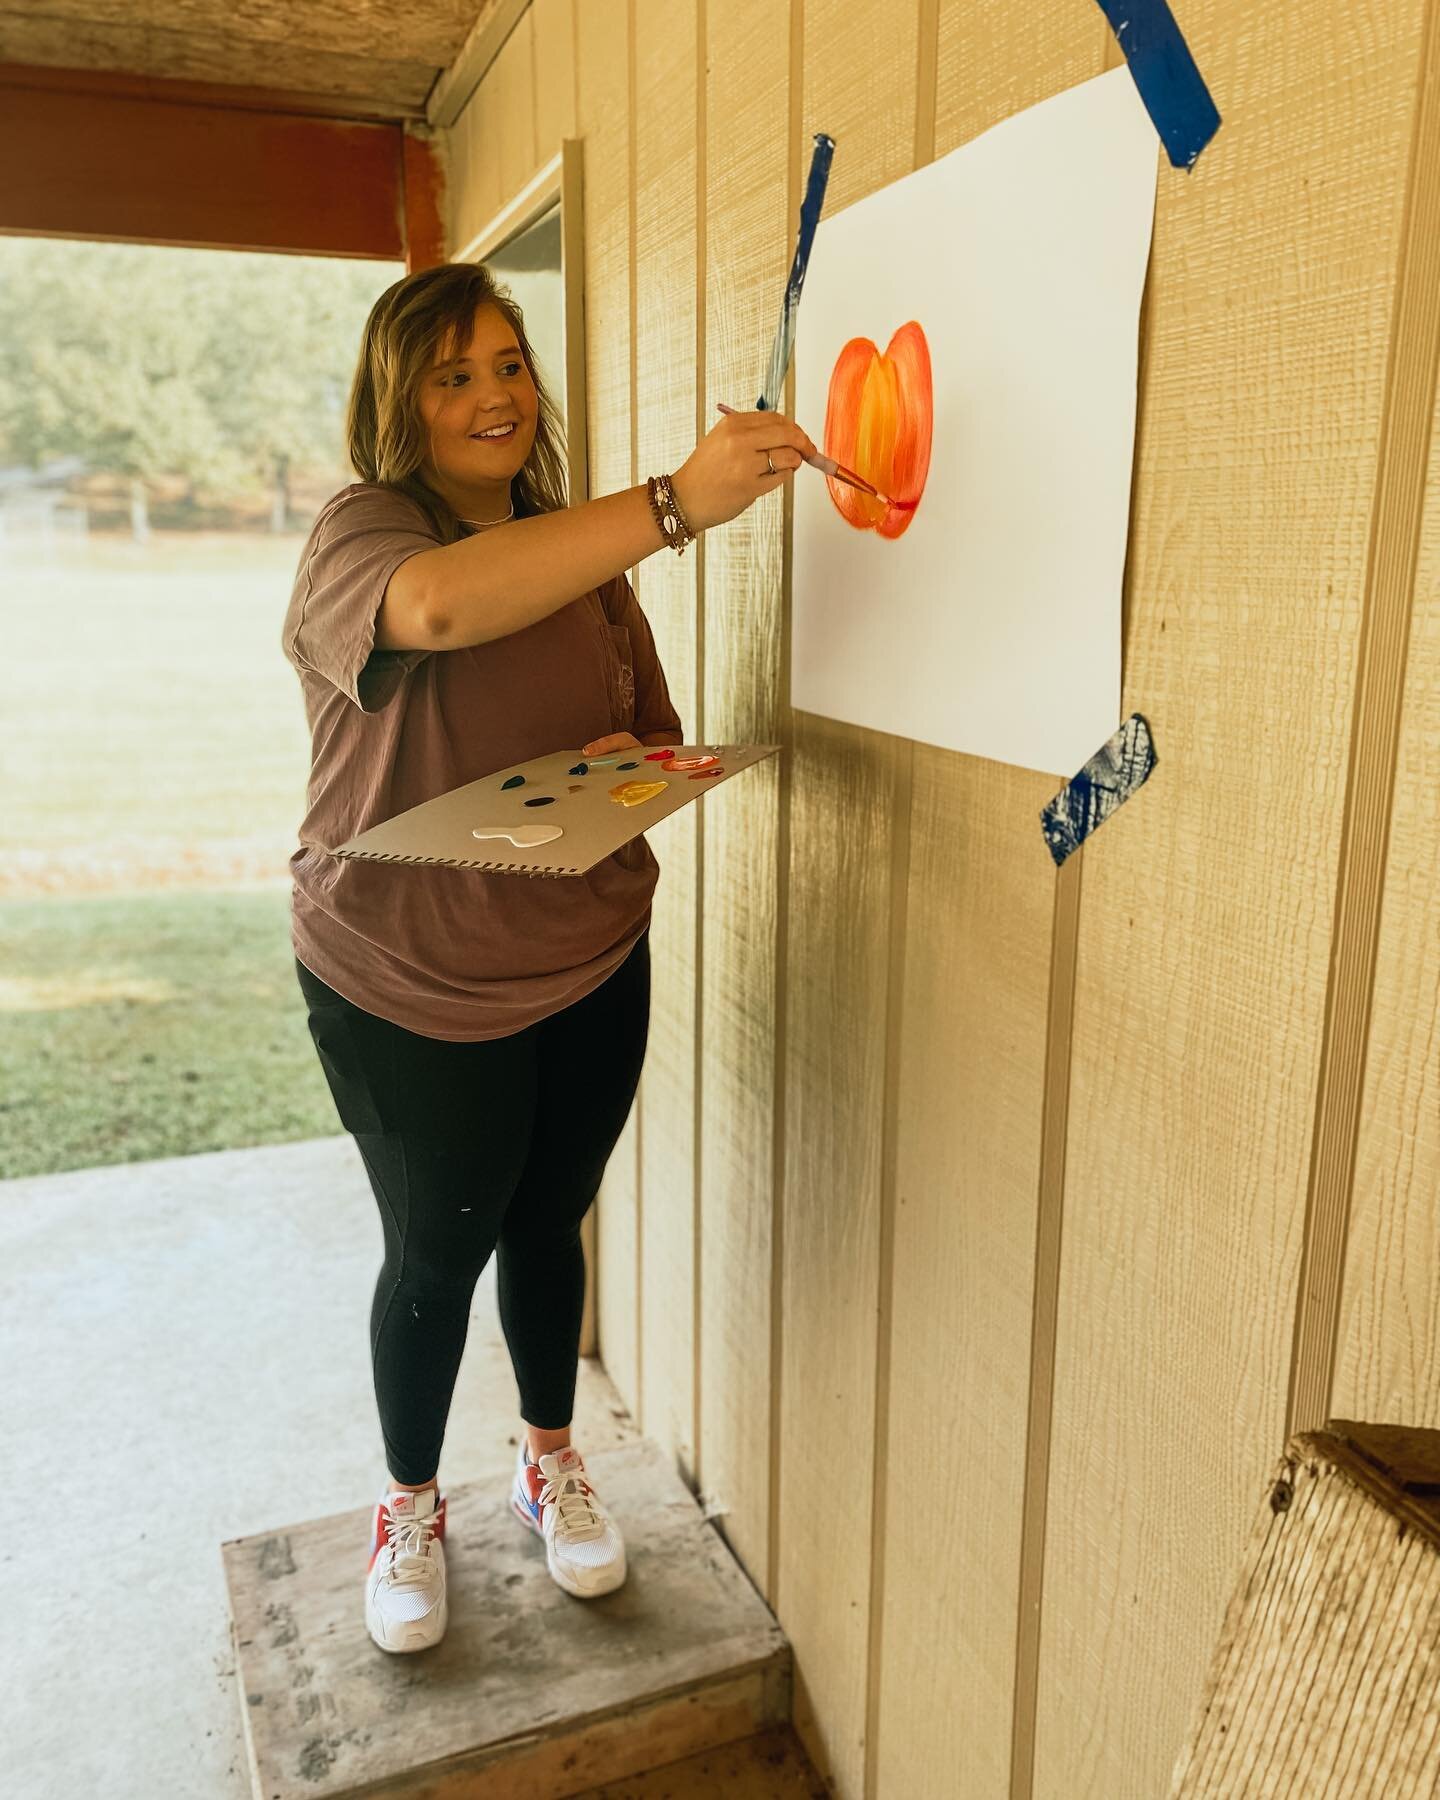 We were so honored to have local artist, Caroline Malone, come teach us to paint fall pumpkins! This was a great opportunity to practice following step-by-step directions, and art skills. 

A huge thank you to Caroline for donating her time and amazi